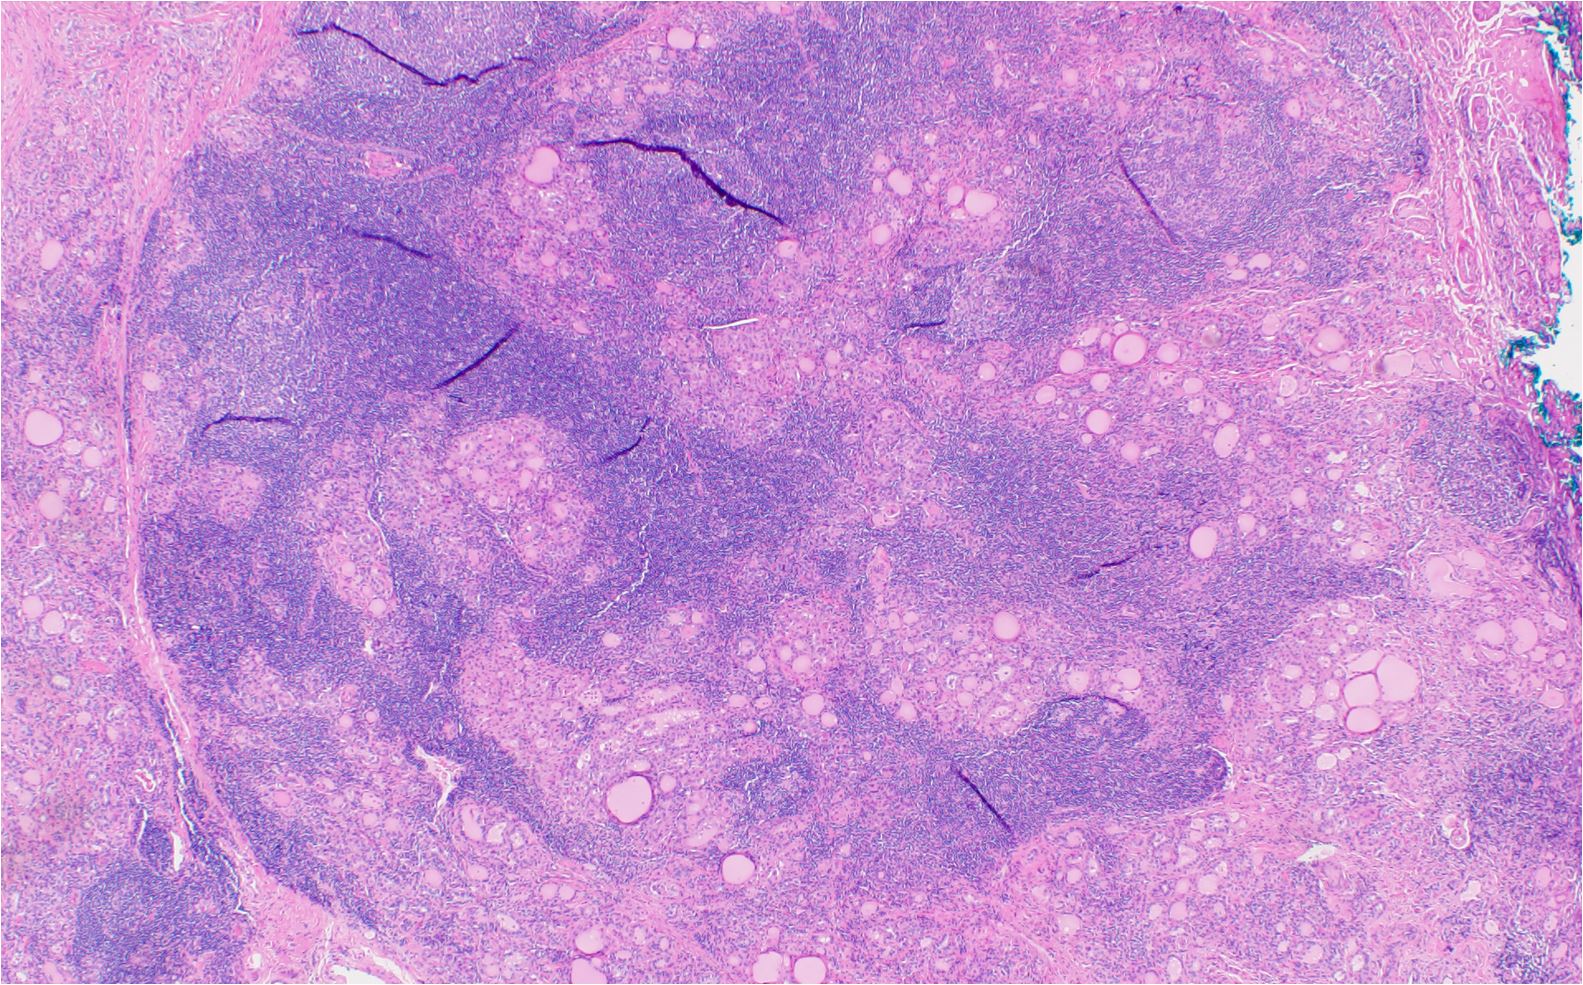 Hashimoto’s thyroiditis characterized by dense lymphoplasmacytic infiltrate of thyroid parenchyma